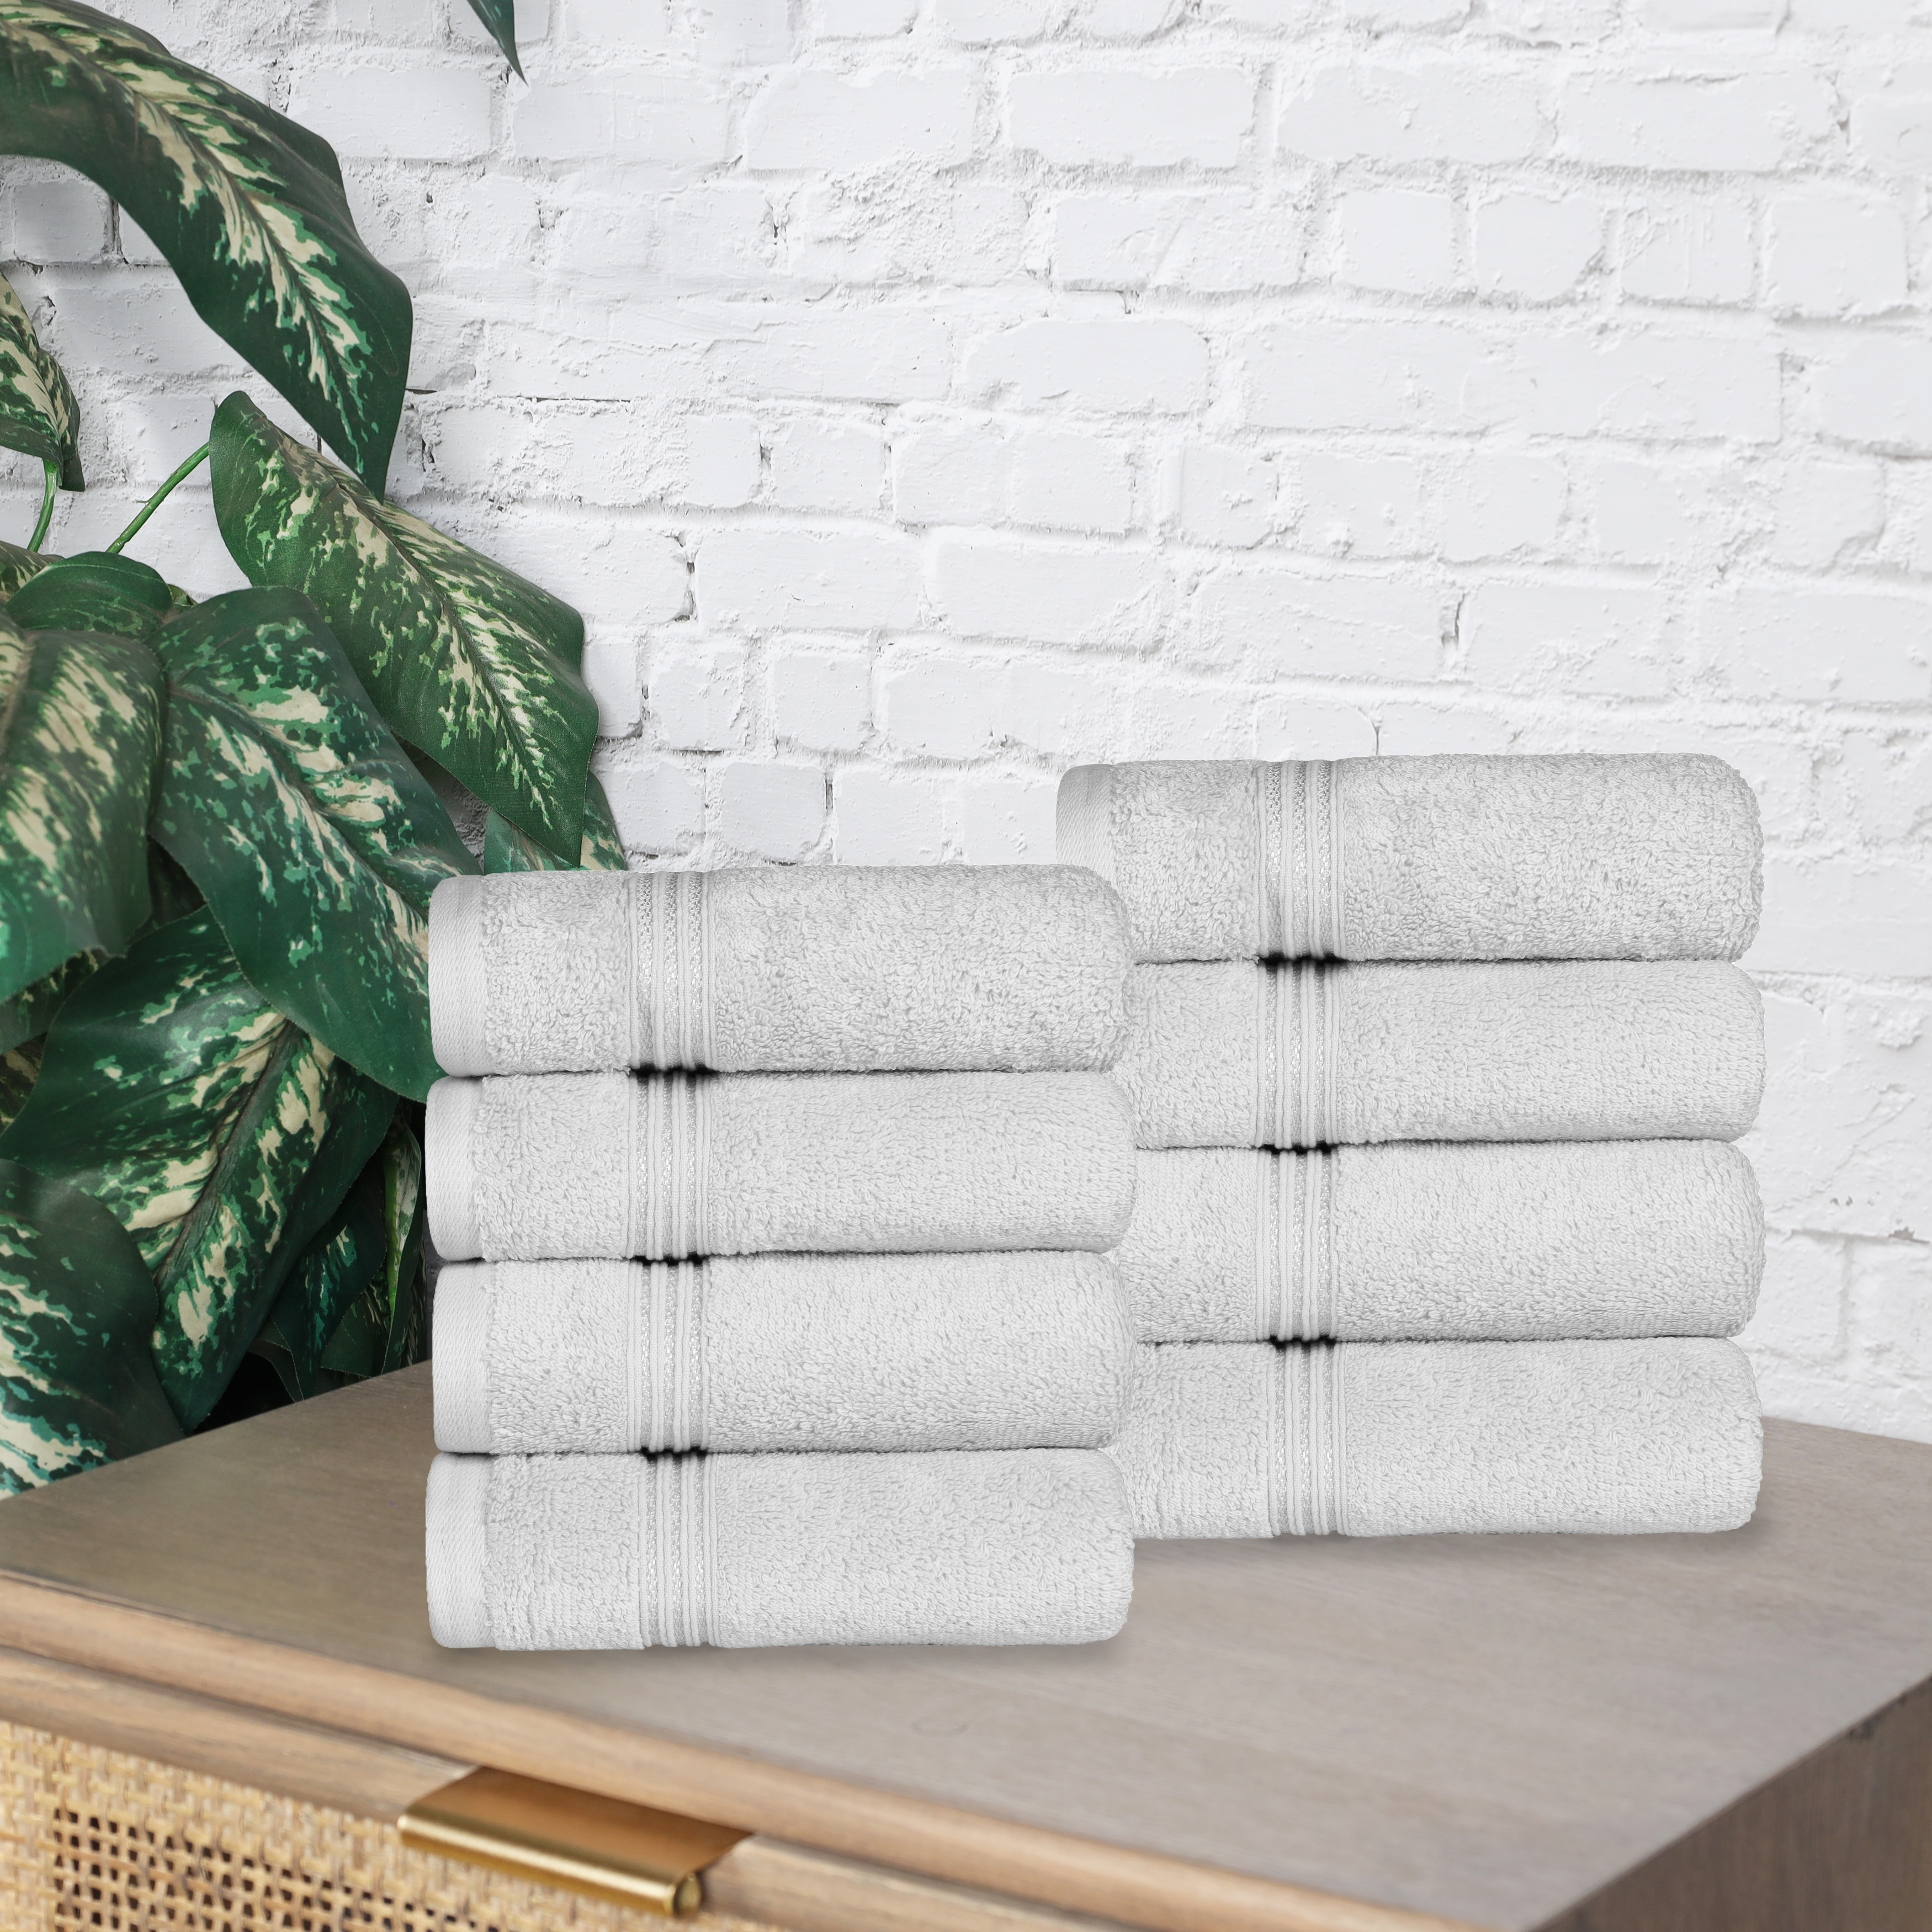 8 Pack Size 15 x 29 Inch Combed Cotton Towel White Super Soft Super Absorbent 